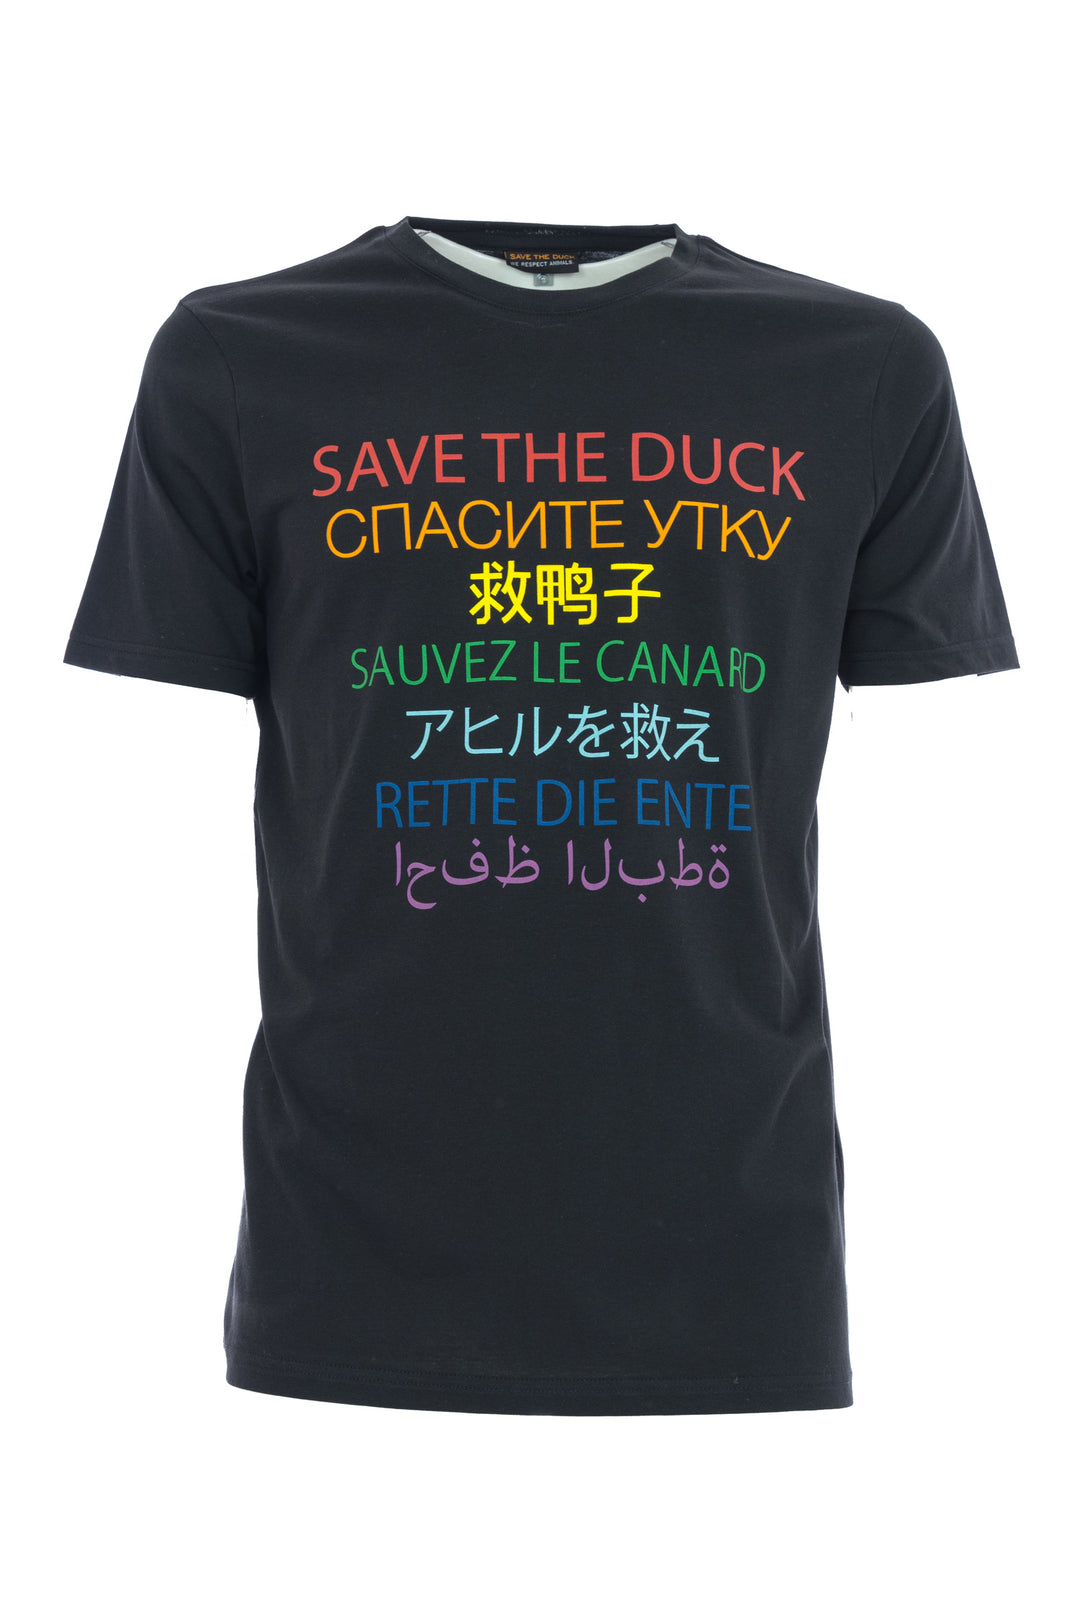 SAVE THE DUCK T-shirt 'SAVE THE DUCK' in cotone nera - Mancinelli 1954